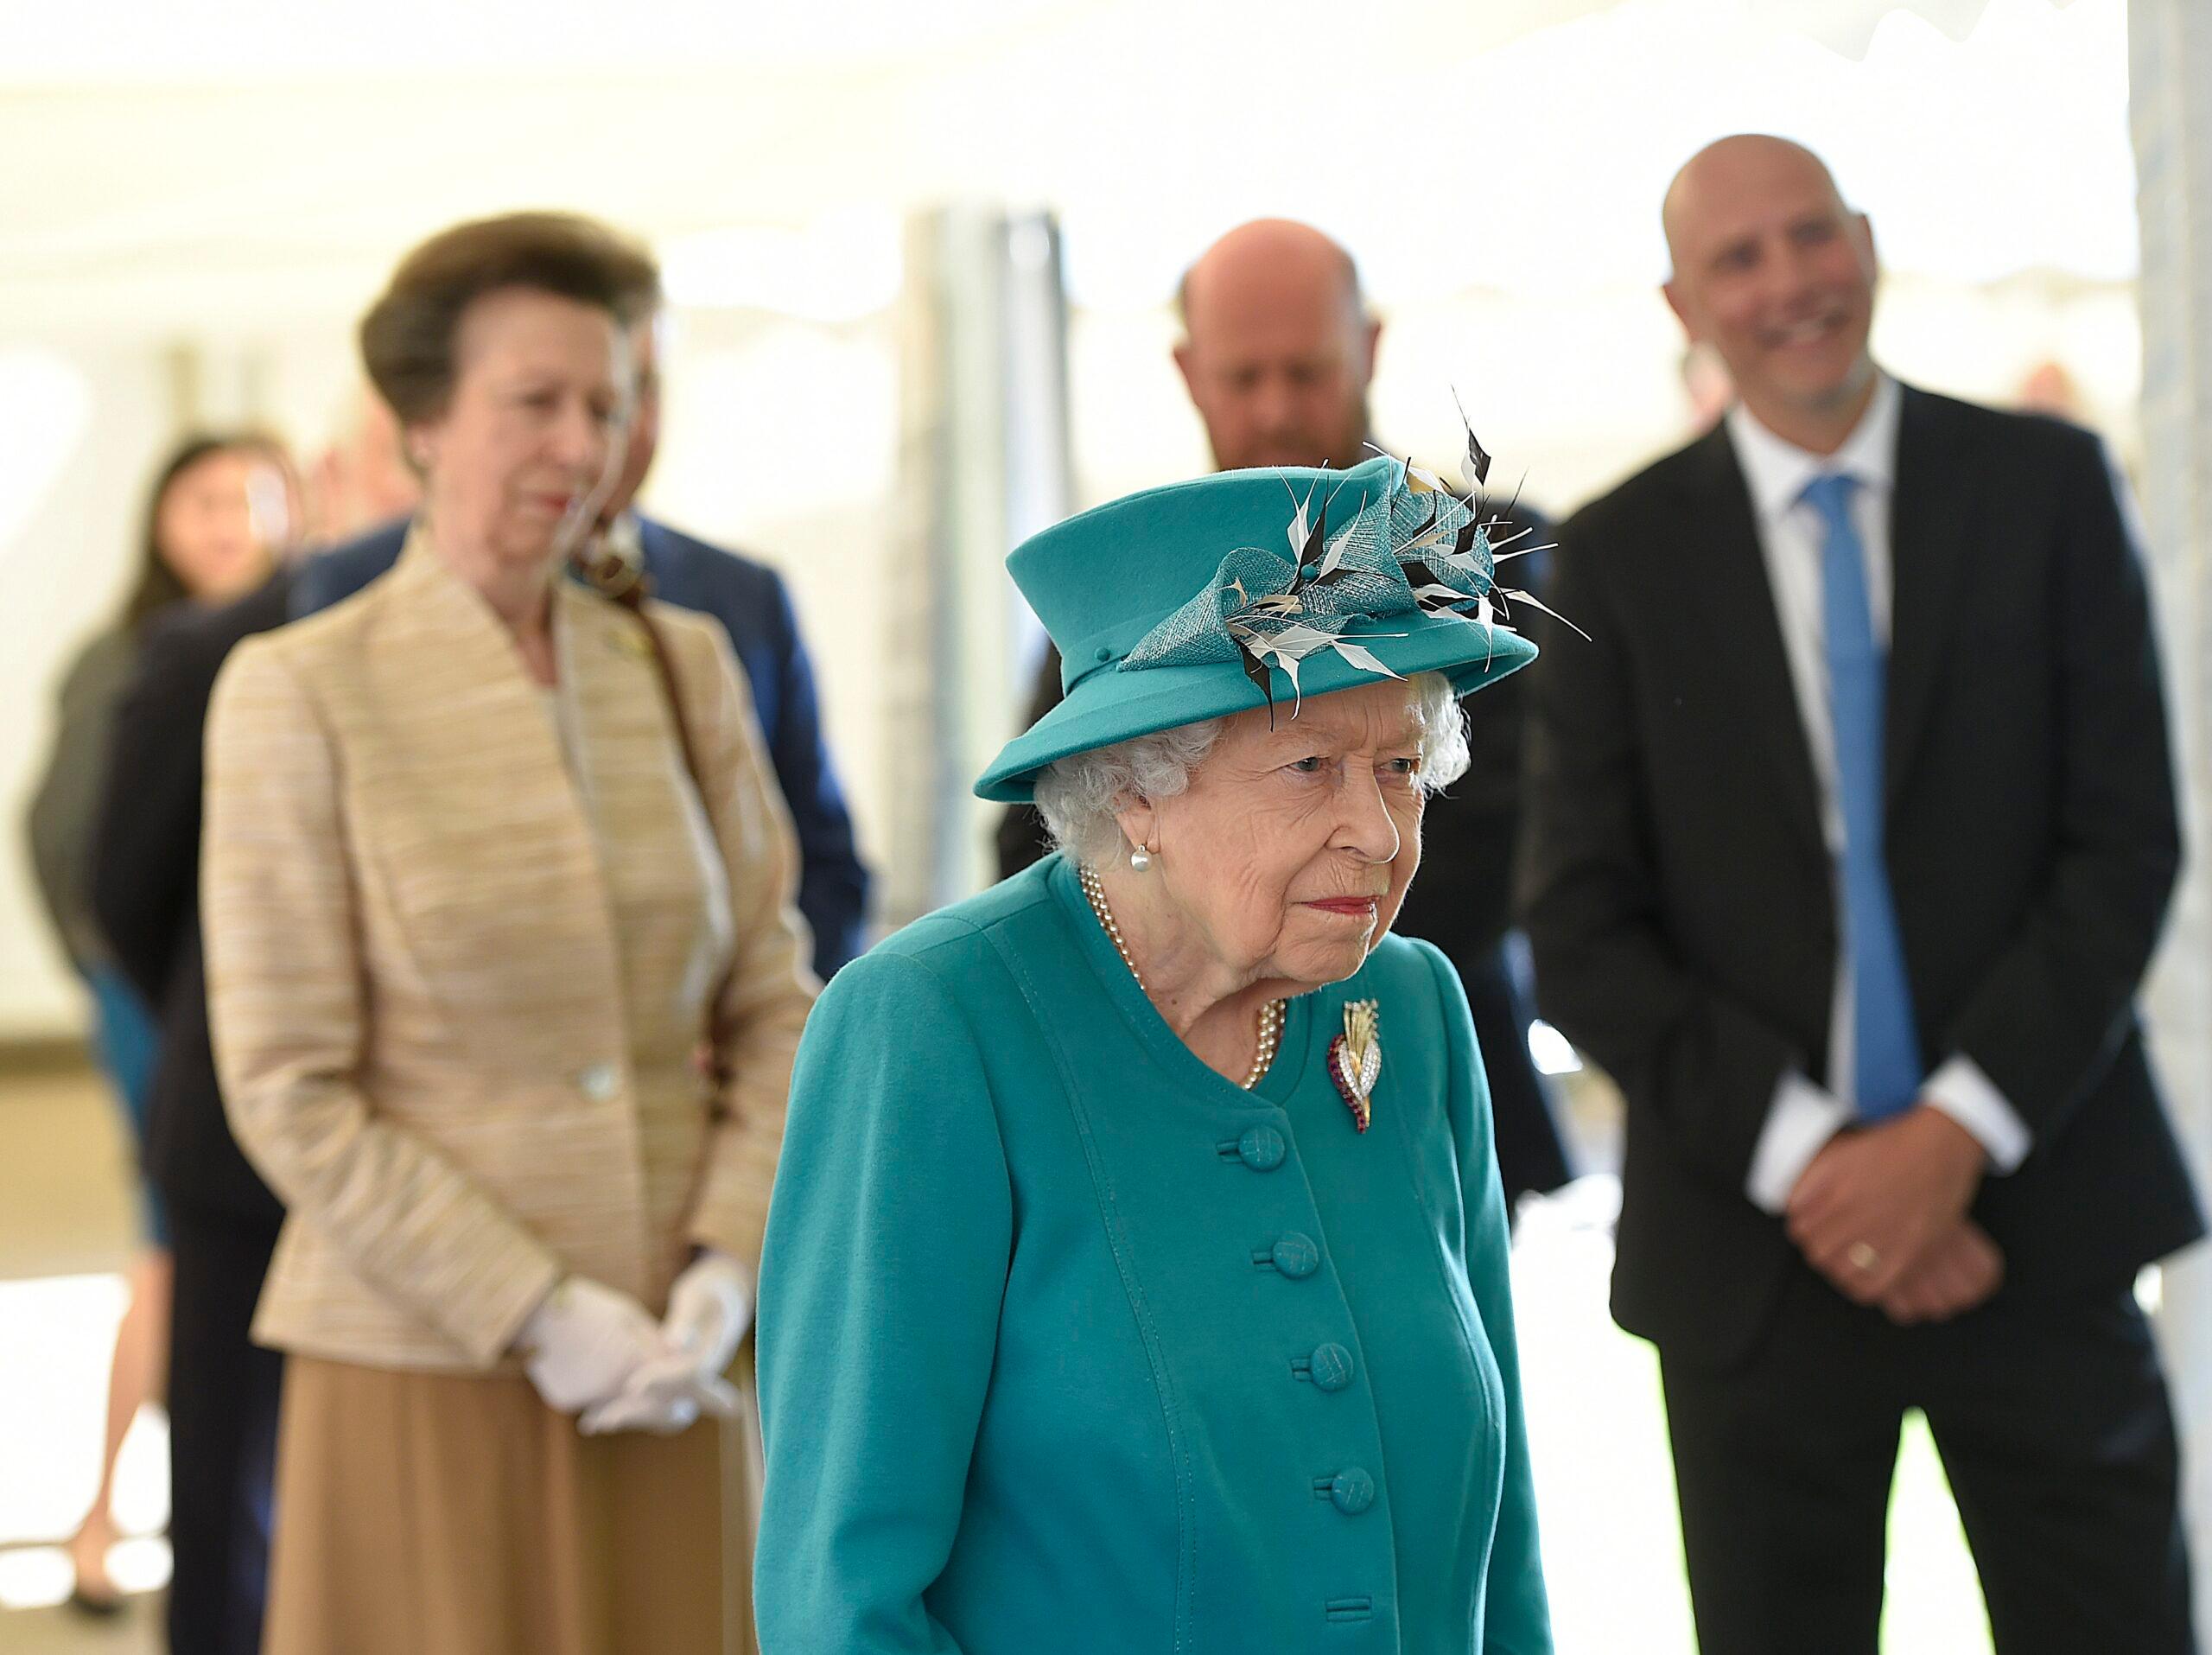 Her Majesty Queen Elizabeth II and Princess Anne The Princess Royal